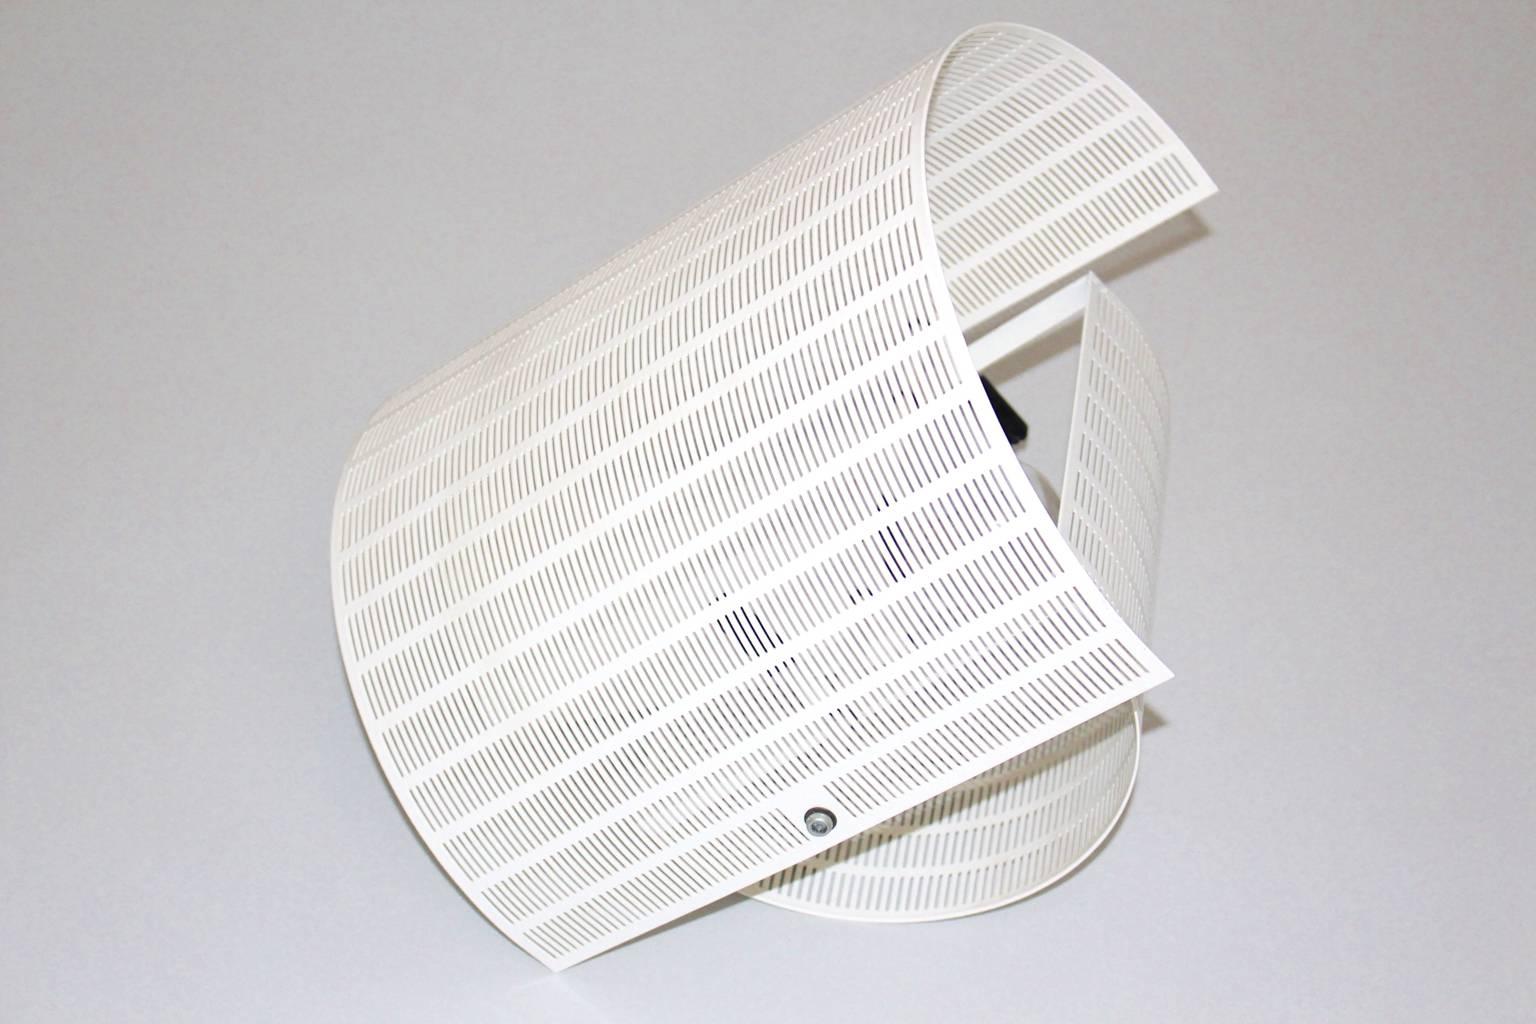 Postmodern White Vintage Sconce or Wall Light Shogun by Mario Botta, 1986 Italy For Sale 1